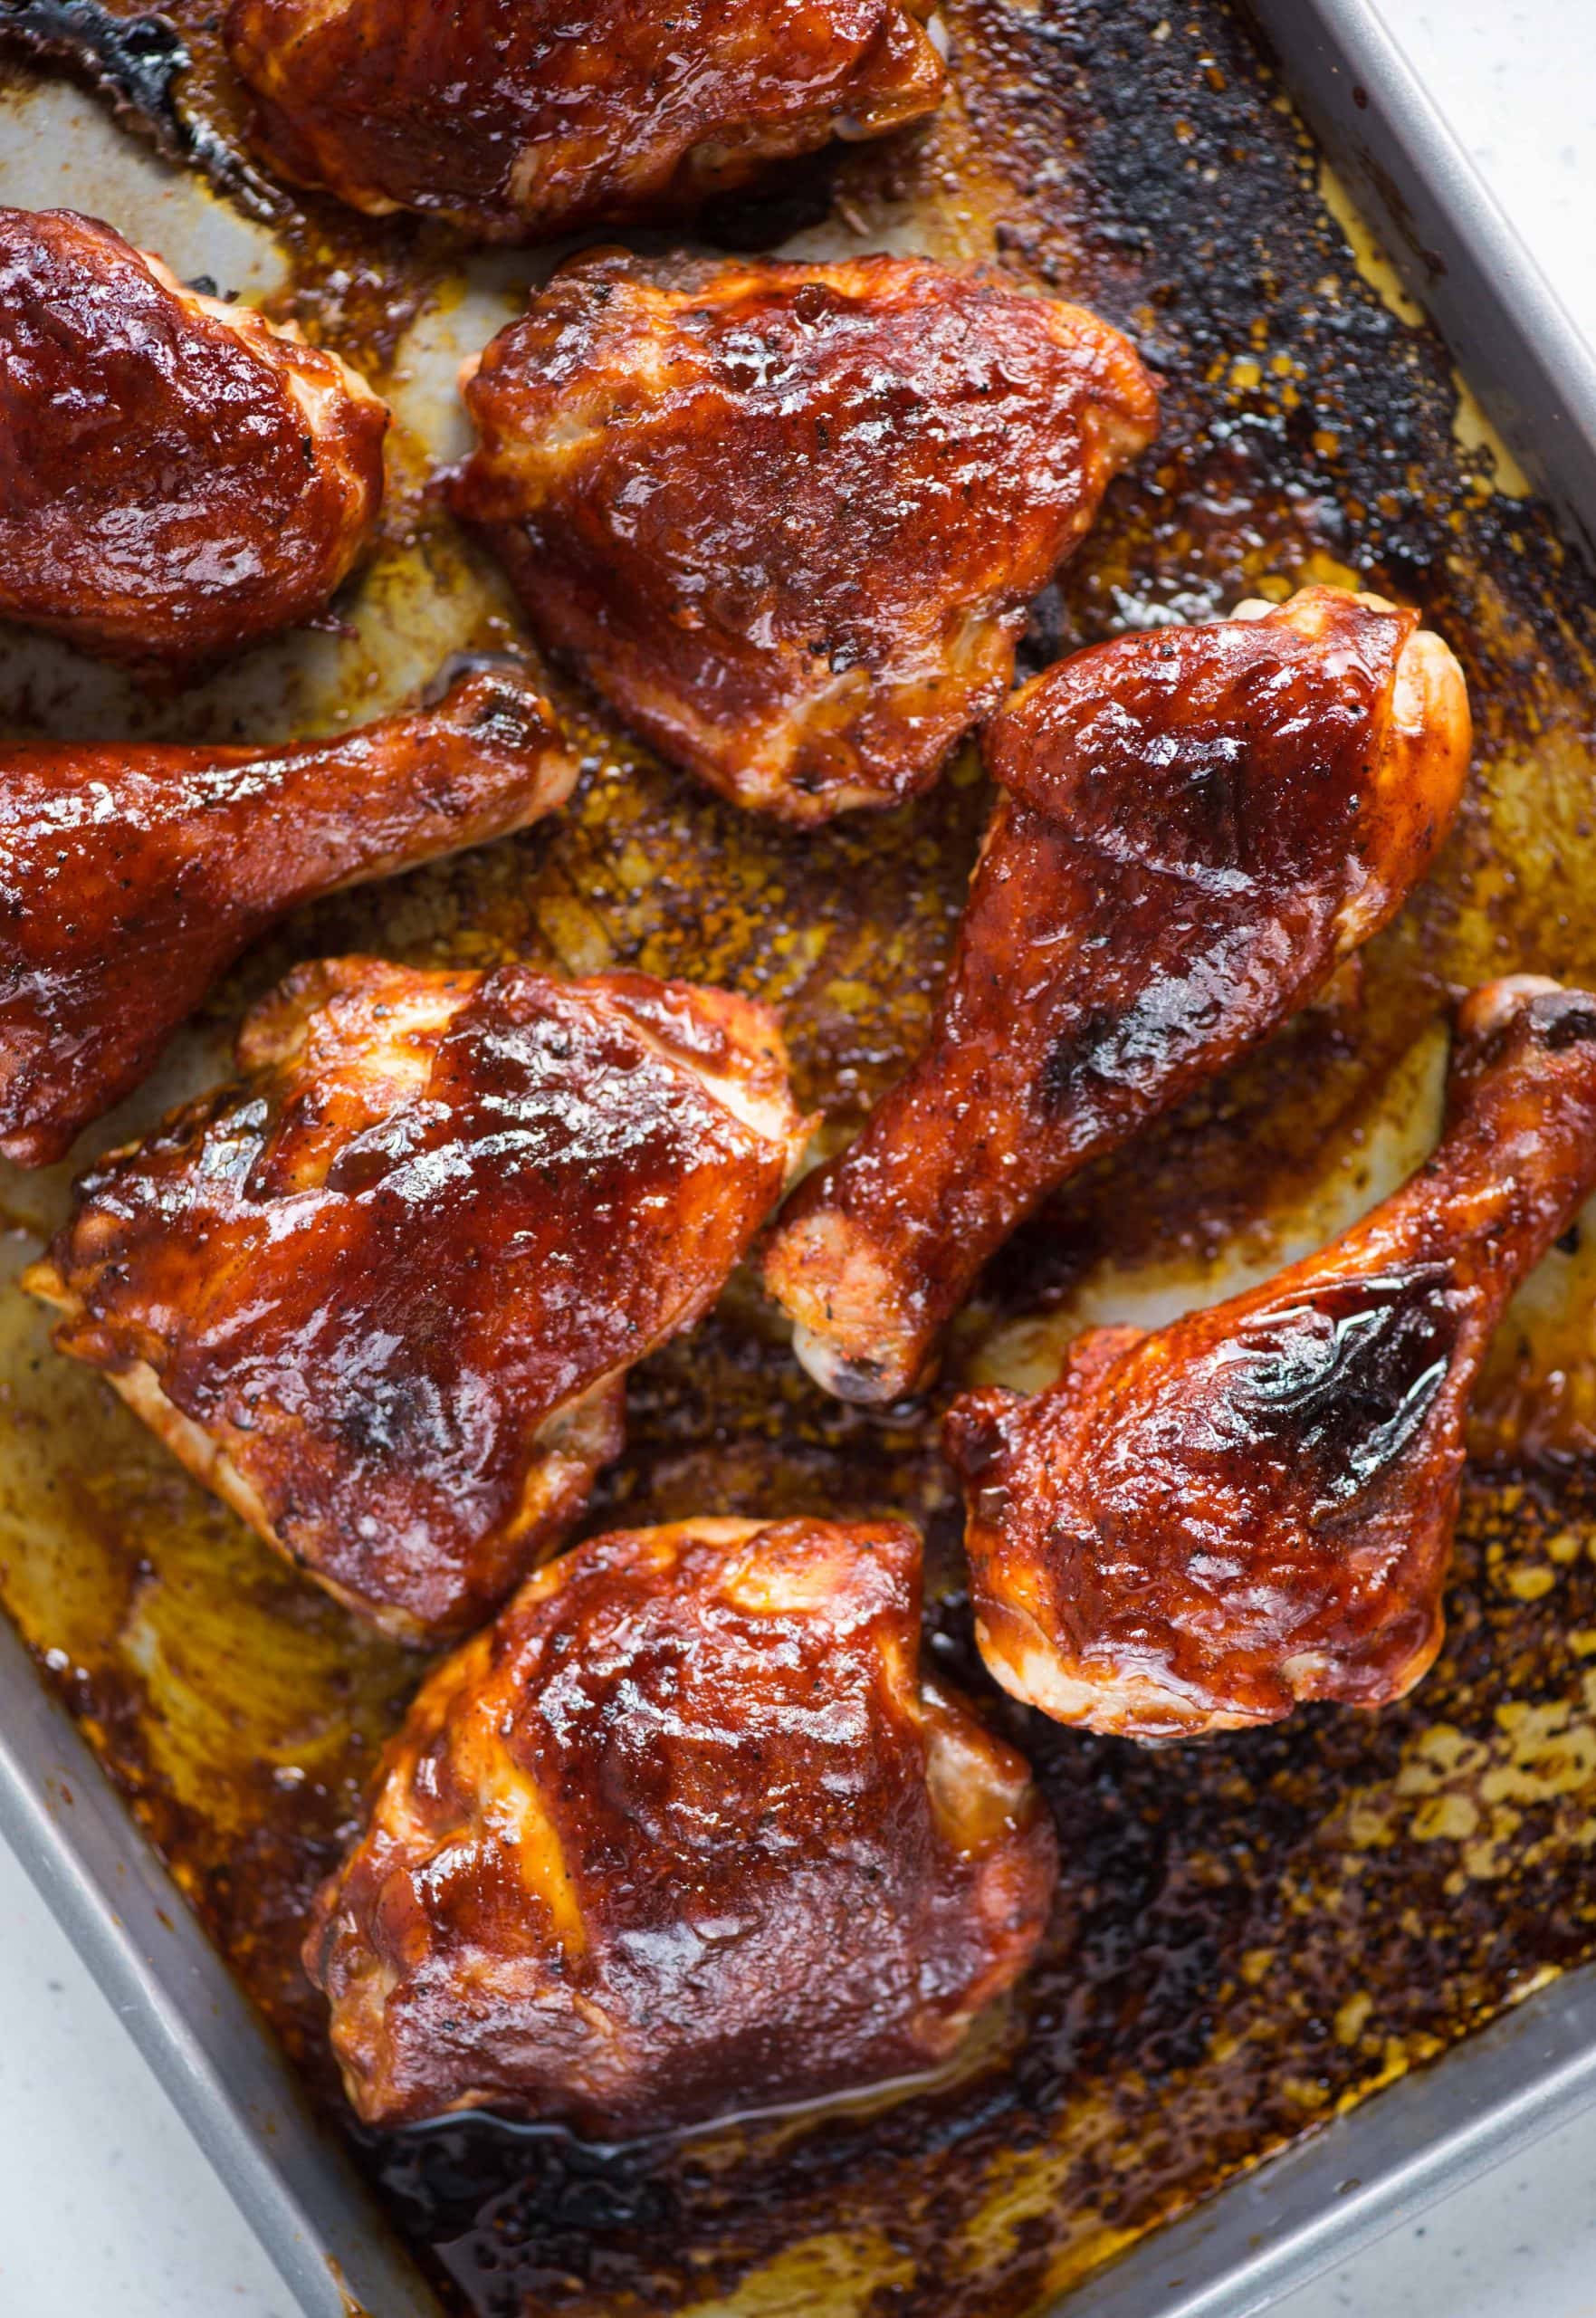 Sweet, smoky flavors of Chicken baked in the oven on a tray with a BBQ sauce